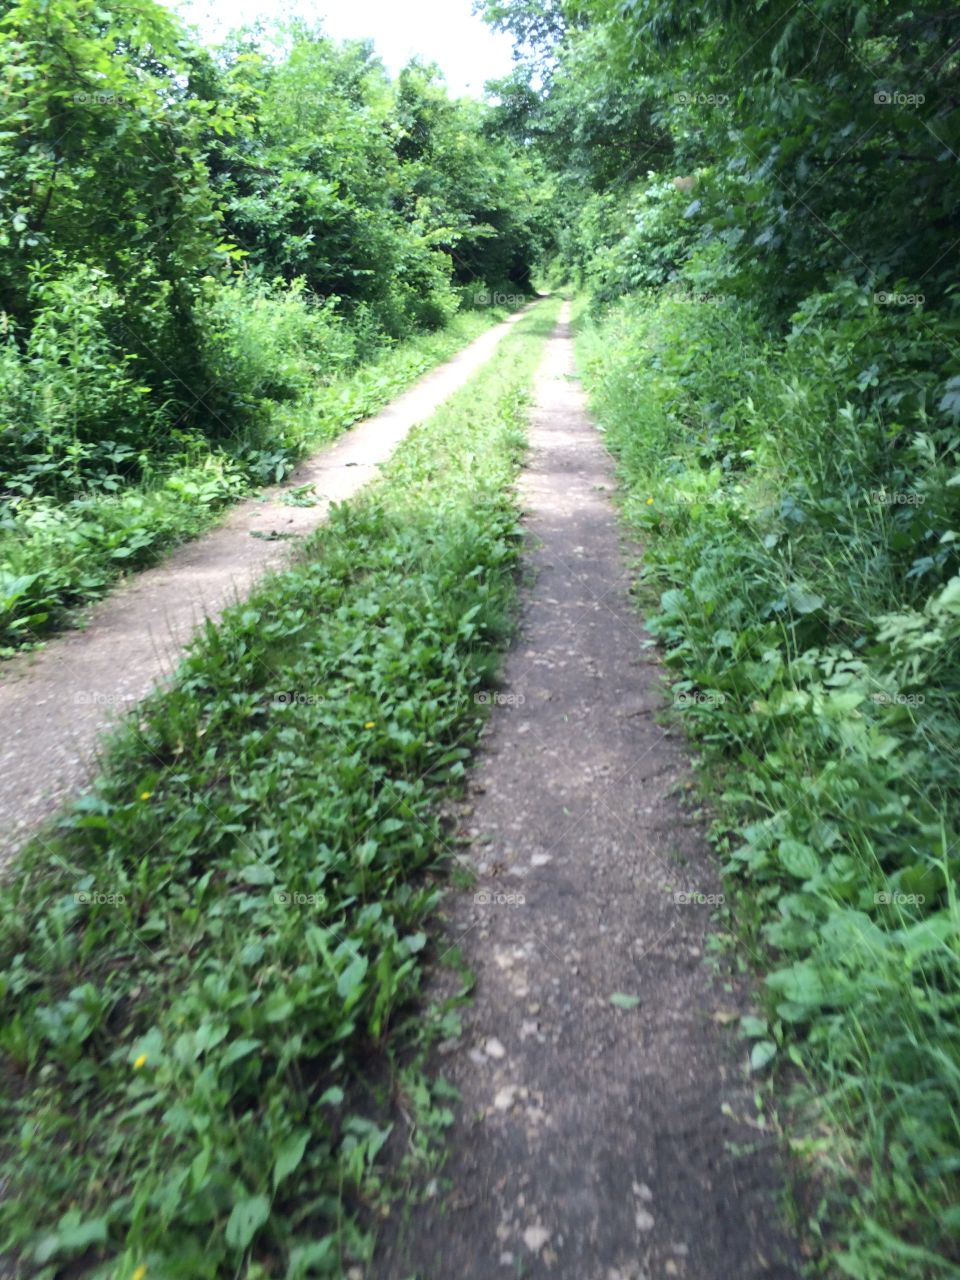 The path less traveled . Bike ride discovery 